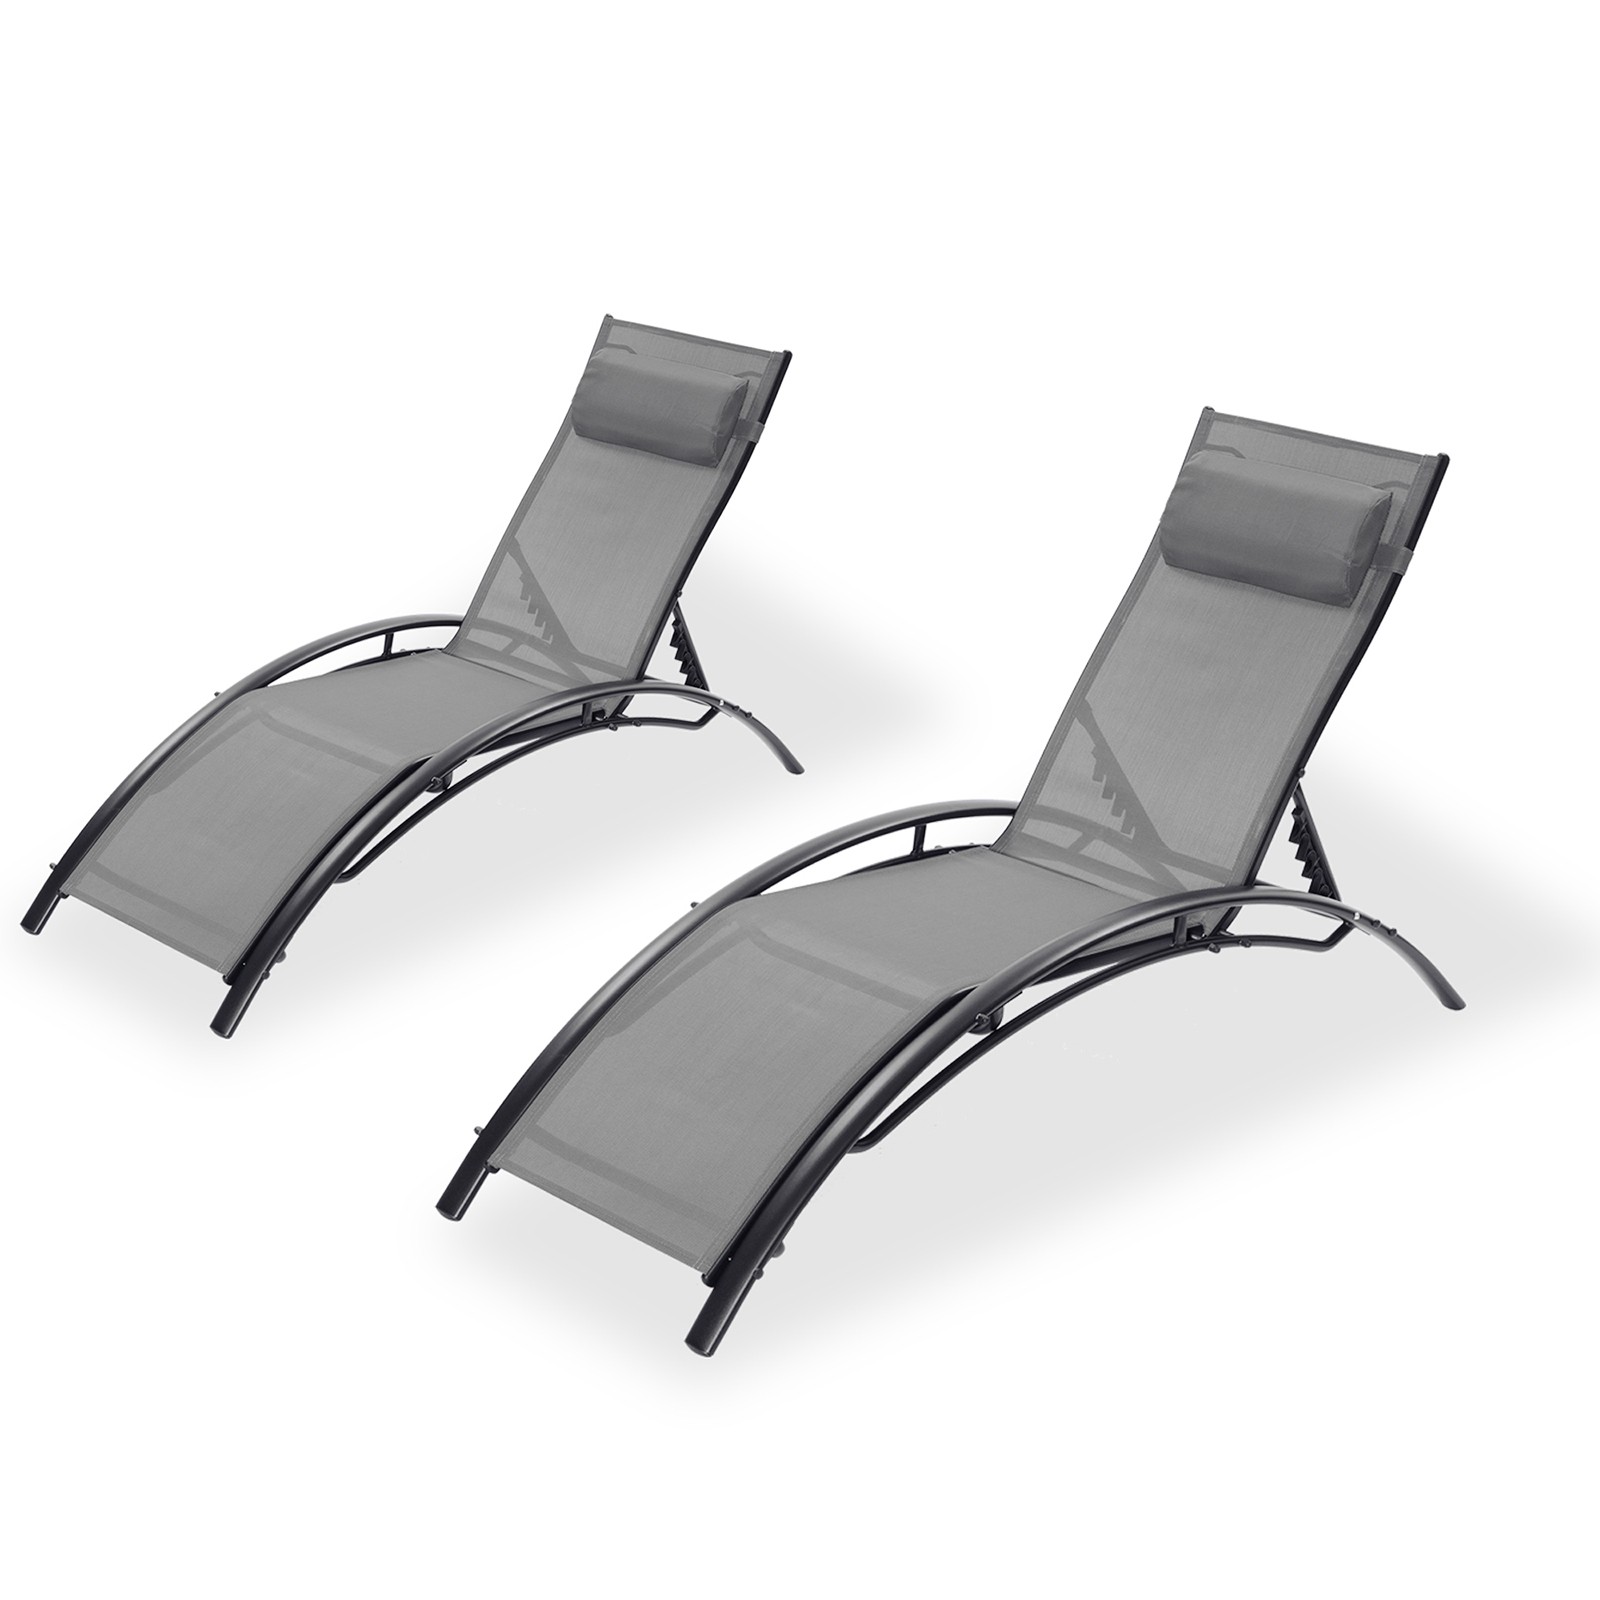 Set of 2, Folding Patio Chaise Lounge Chair for Outside, Aluminum Adjustable Outdoor Pool Recliner Chair, Black Frame (Grey) - image 1 of 5